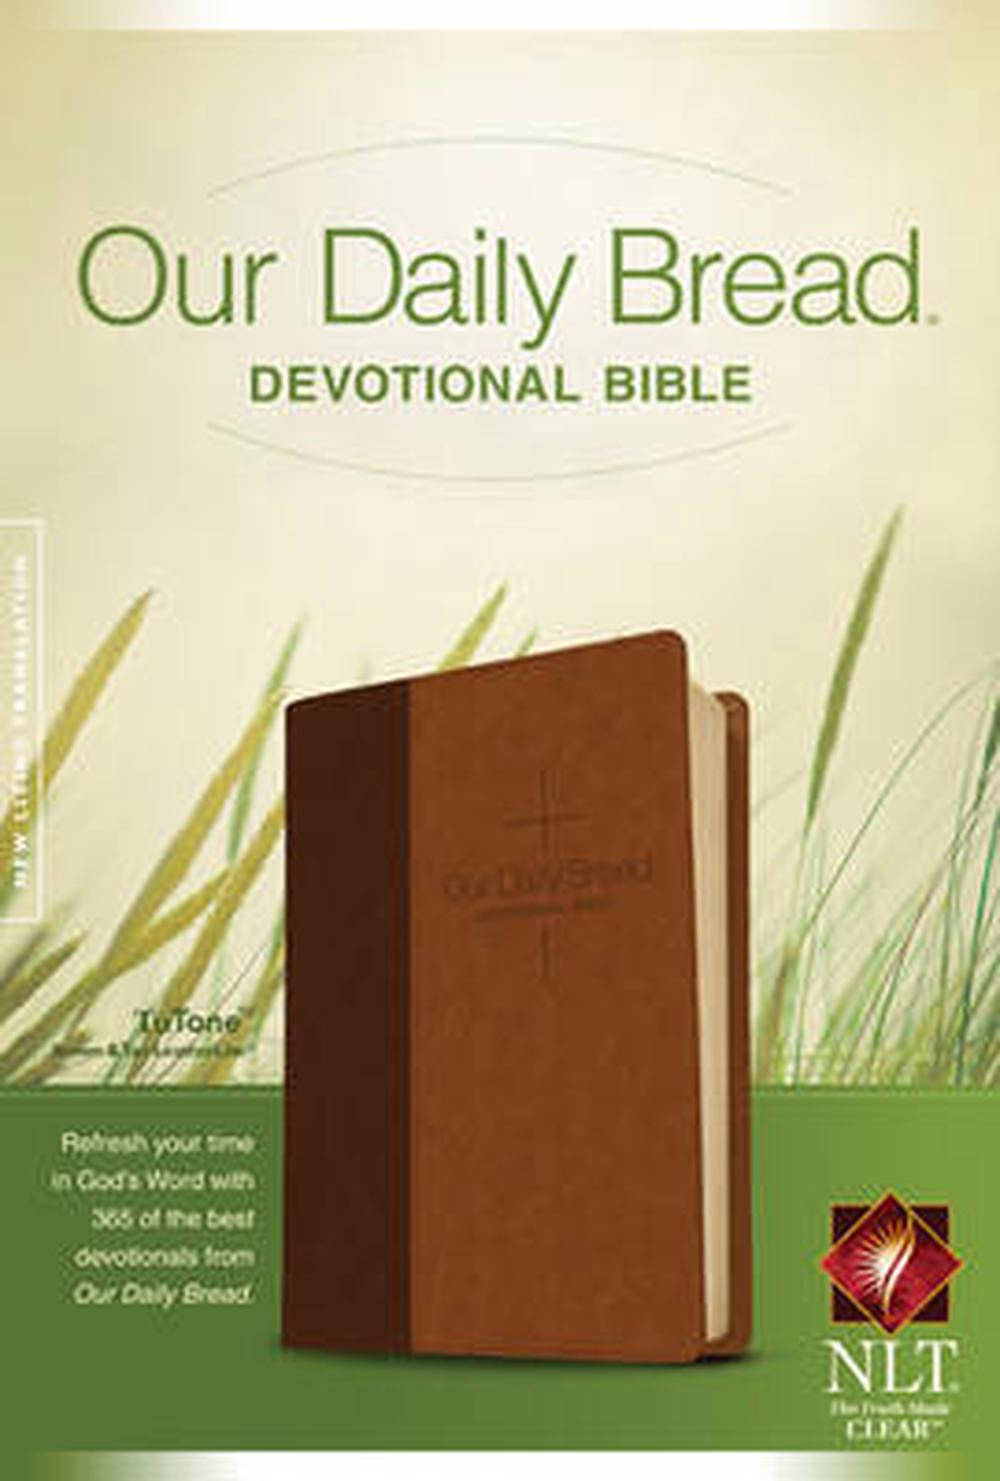 our daily bread reading